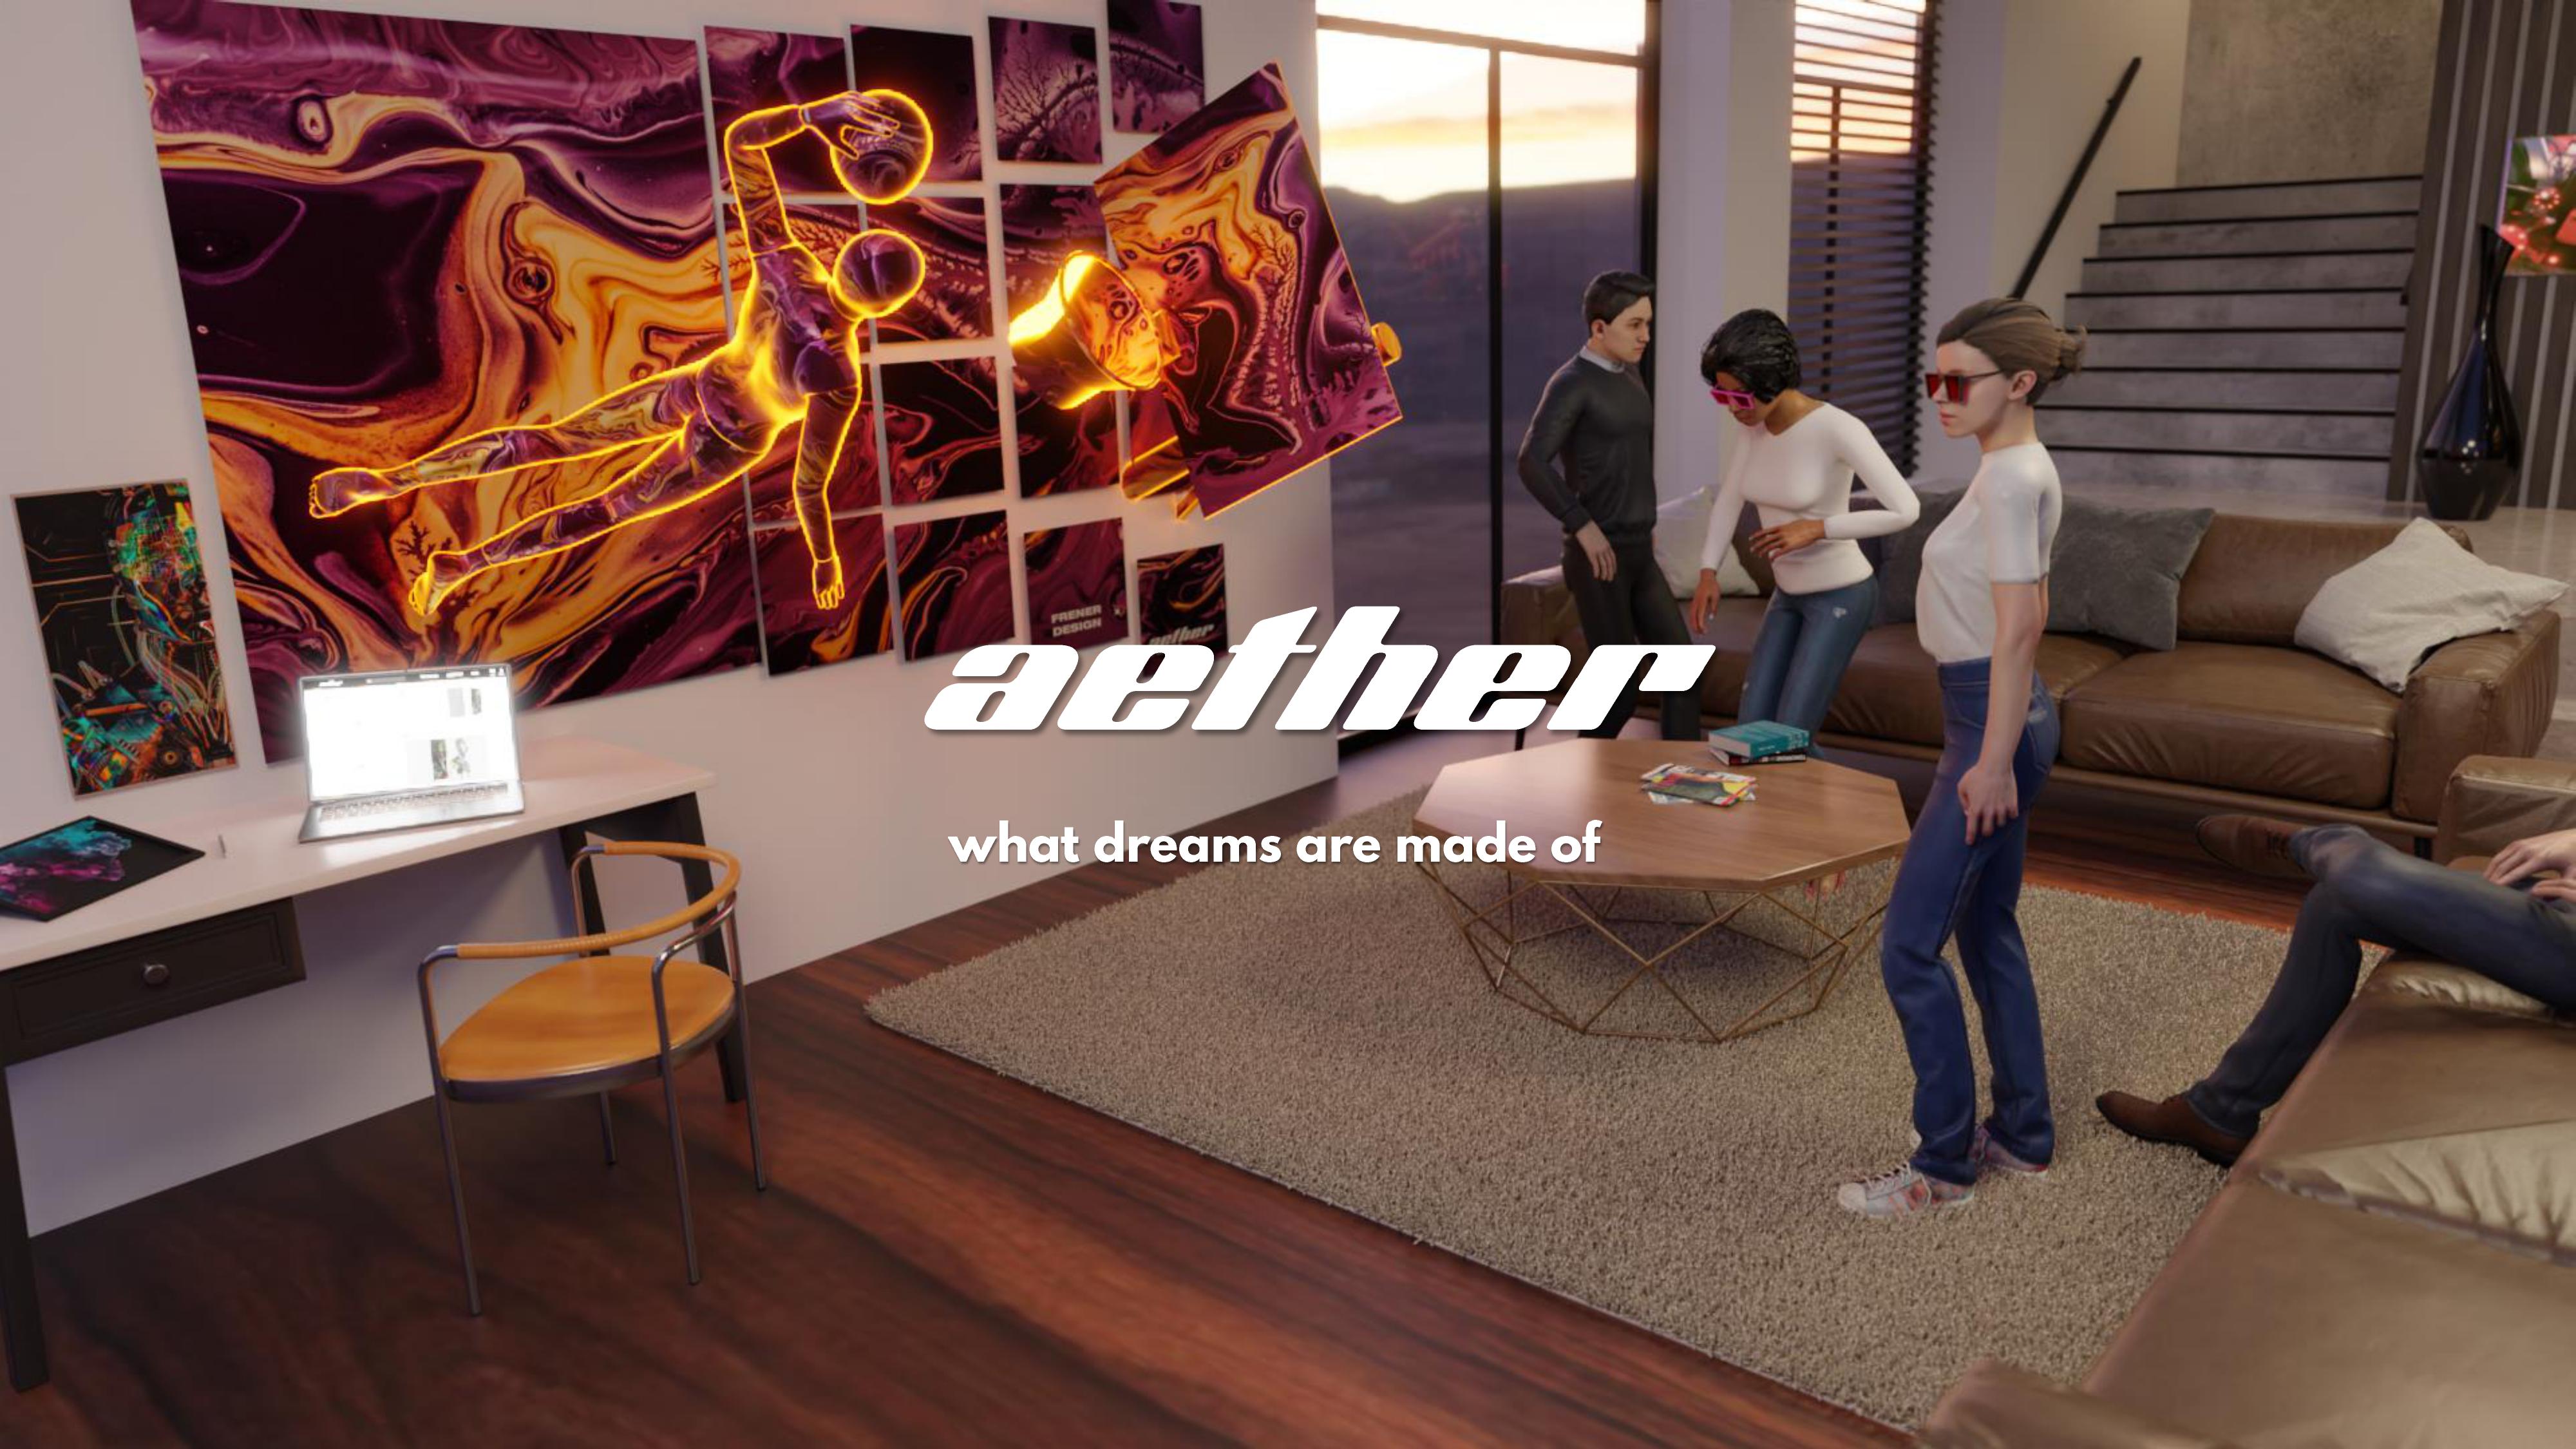 Aether SmartTiles